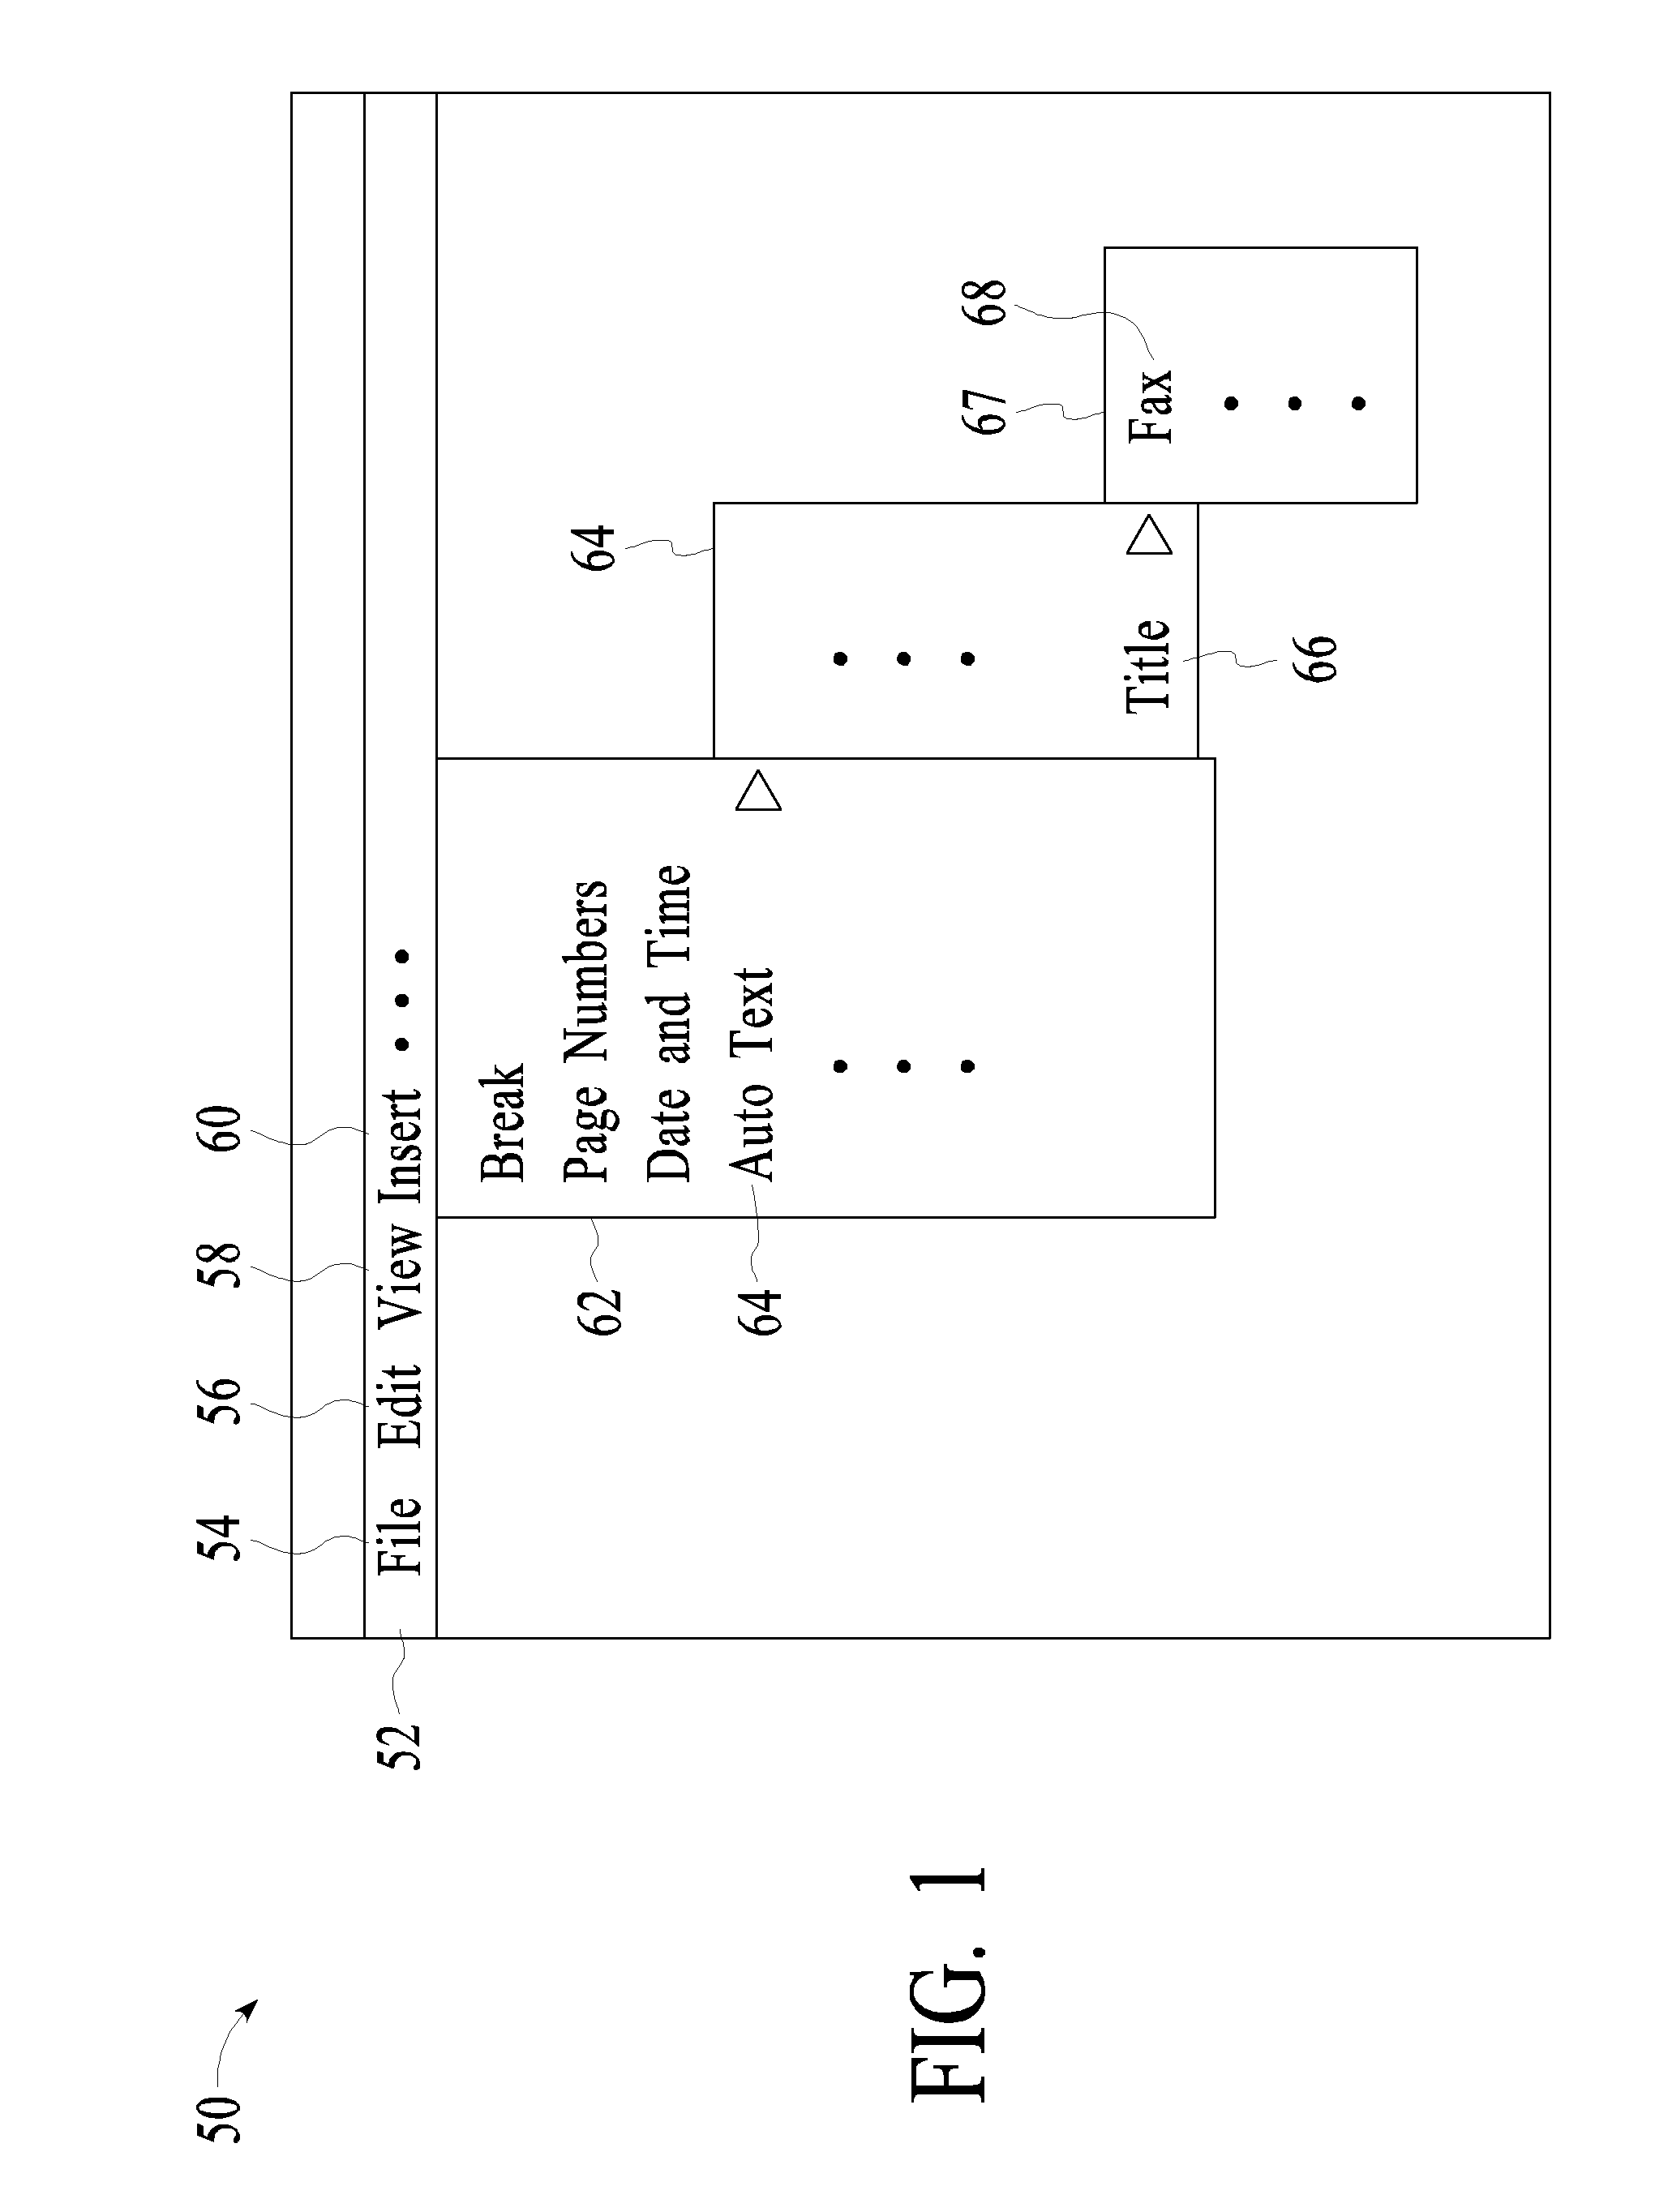 System for consolidated associated buttons into easily accessible groups